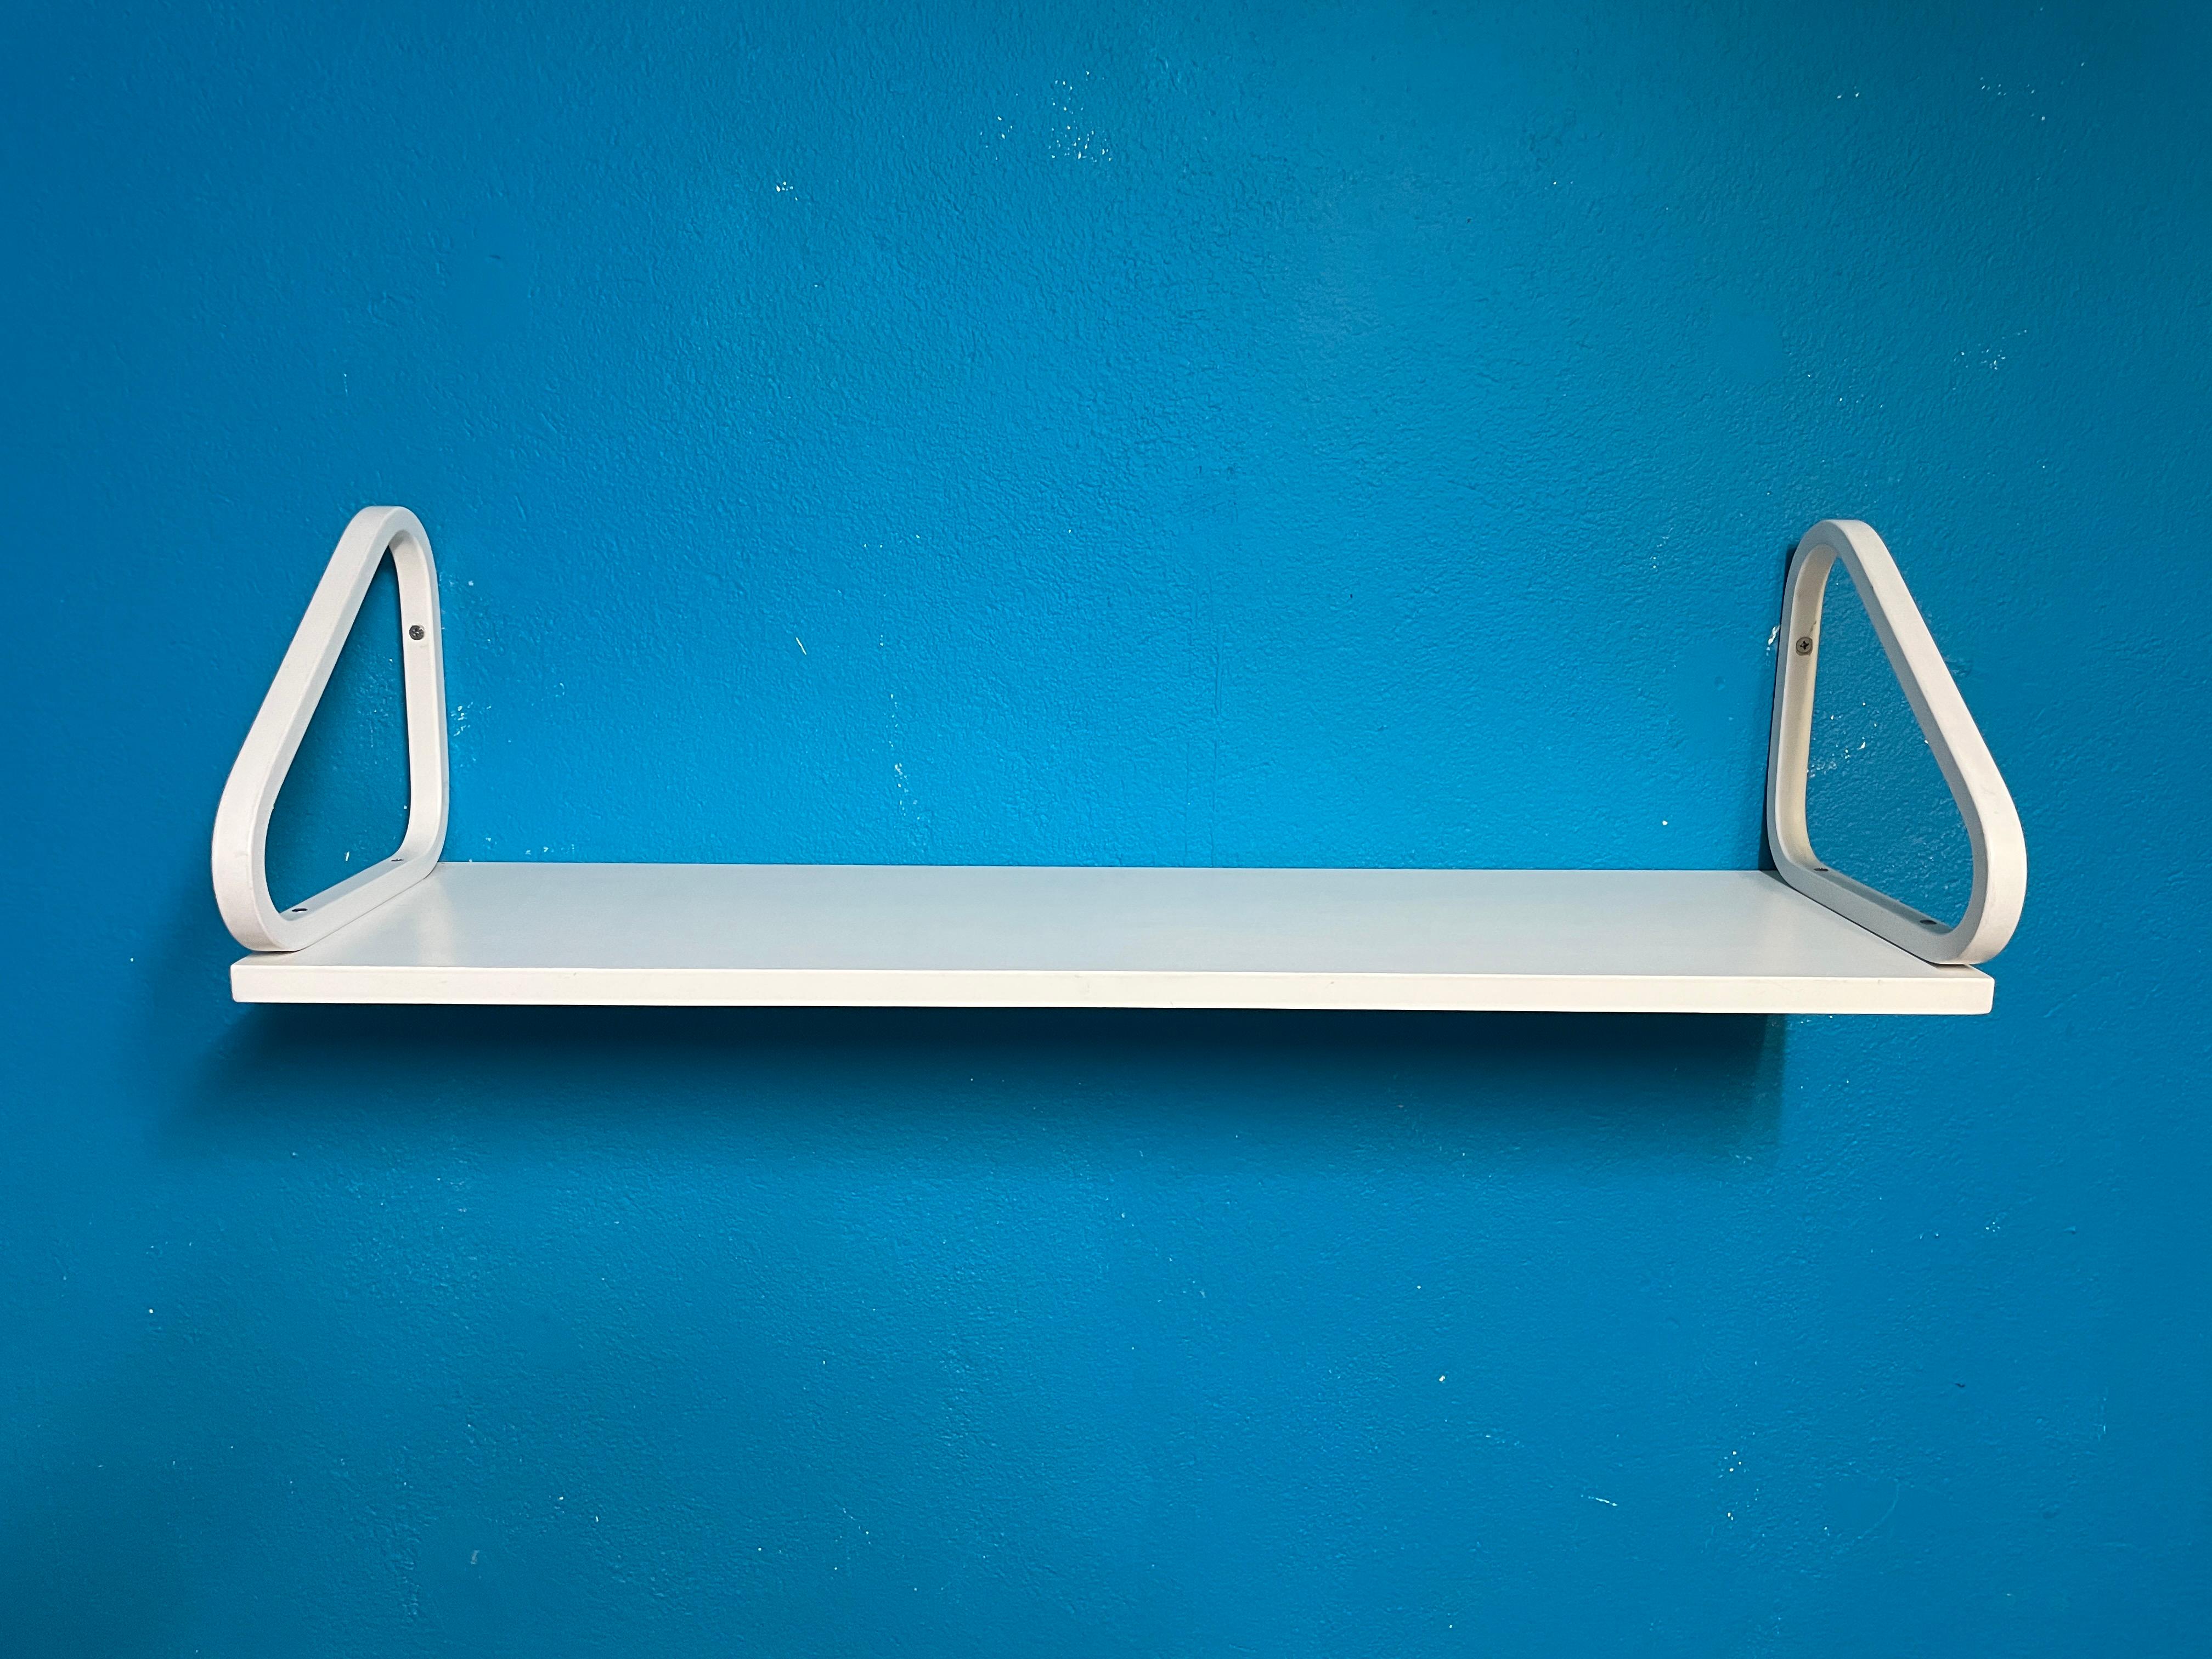 Artek's wall shelf 112B is an elegant and practical shelf that can be used for books, decorative lamps or small items. Alvar Aalto designed the wall shelf 112 in 1936.

This one was made in the 1980s. Original white paint job. Shelf can be mounted